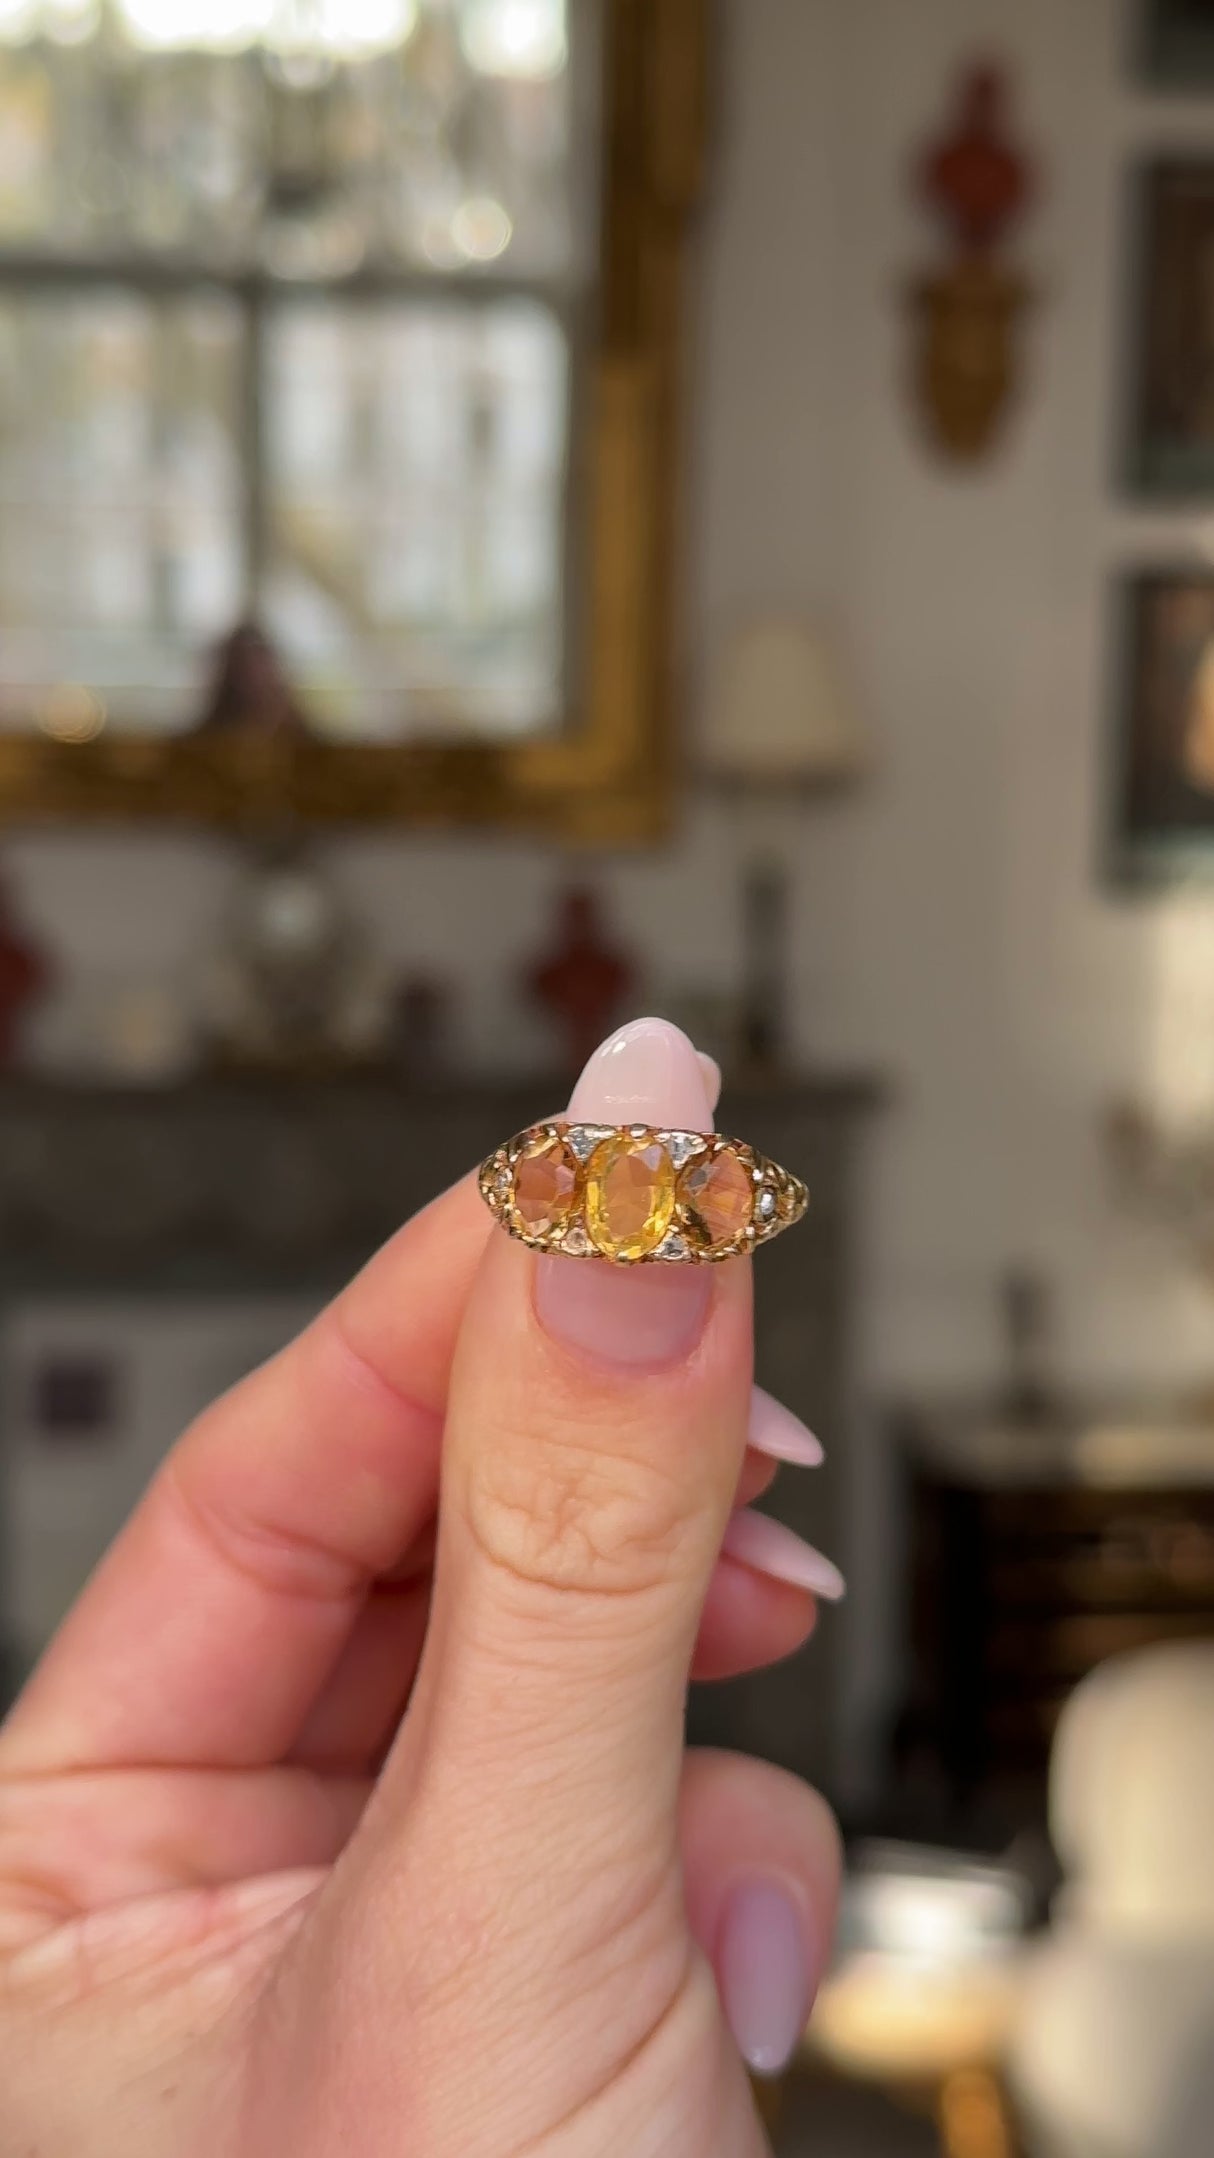 Three stone citrine ring held in fingers and moved around to give perspective.